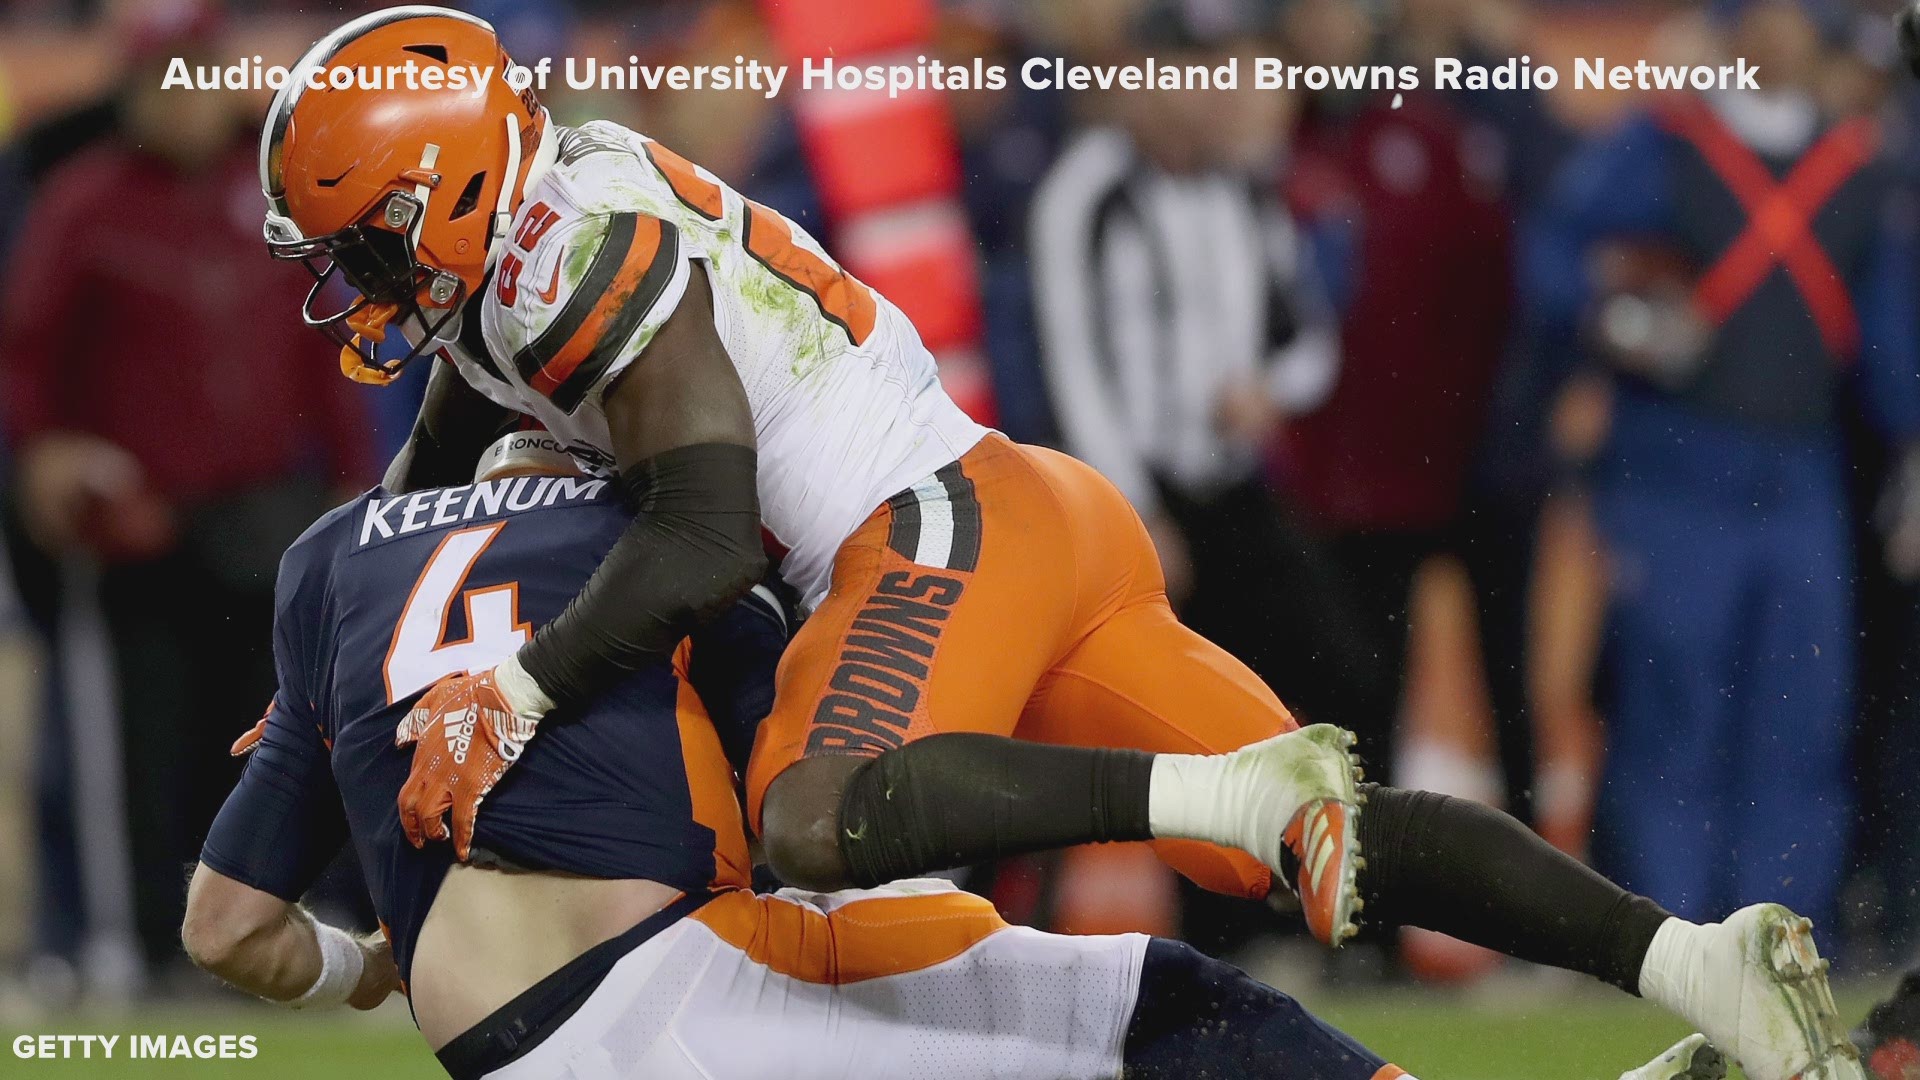 LISTEN | Jim Donovan calls Jabrill Peppers' dramatic sack that clinched victory for Cleveland Browns